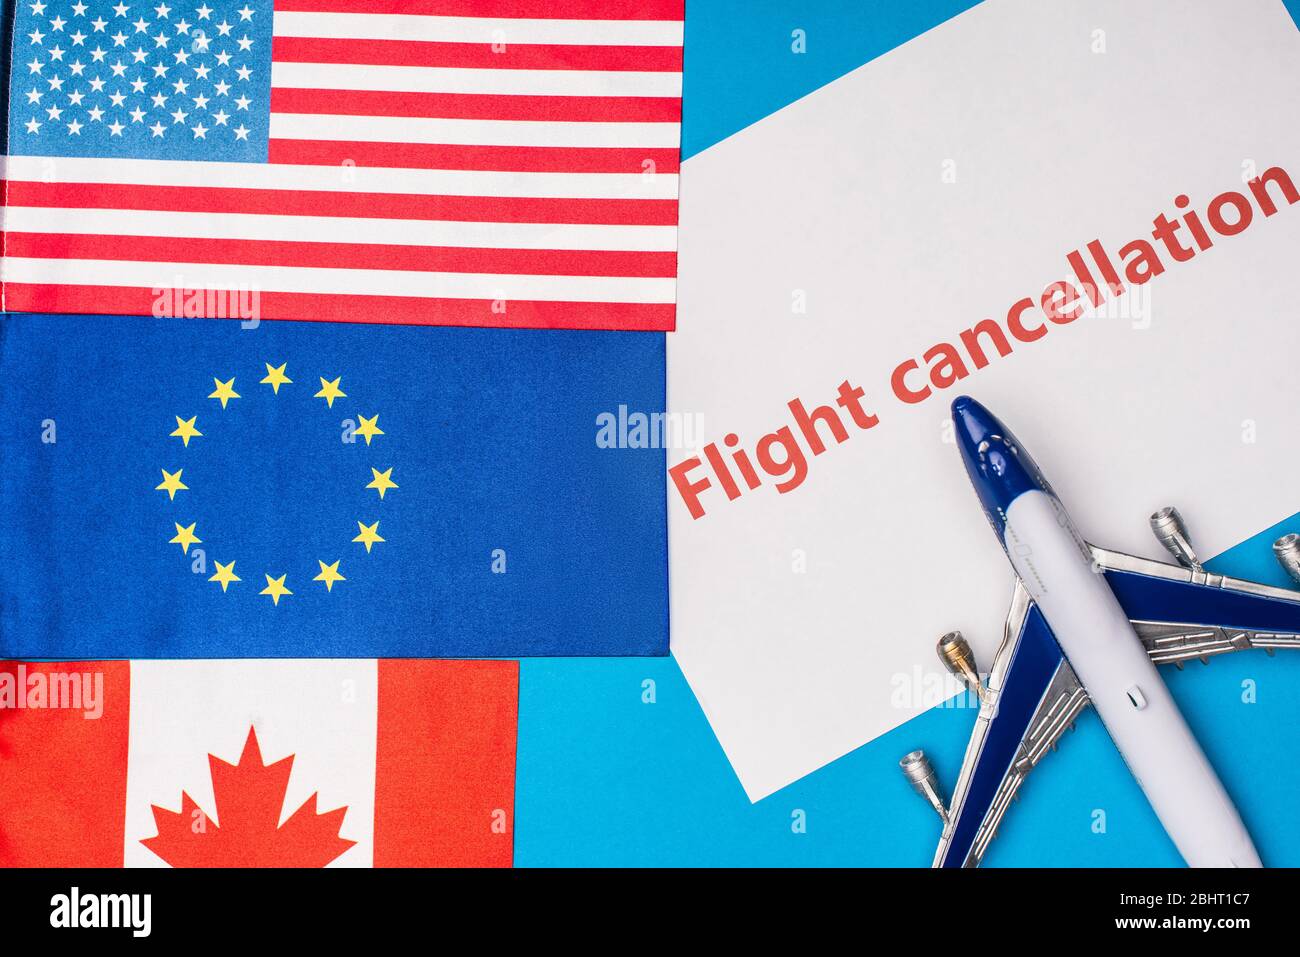 Top view of flags of canada, european union and america near toy plane with flight cancellation lettering on card on blue surface Stock Photo